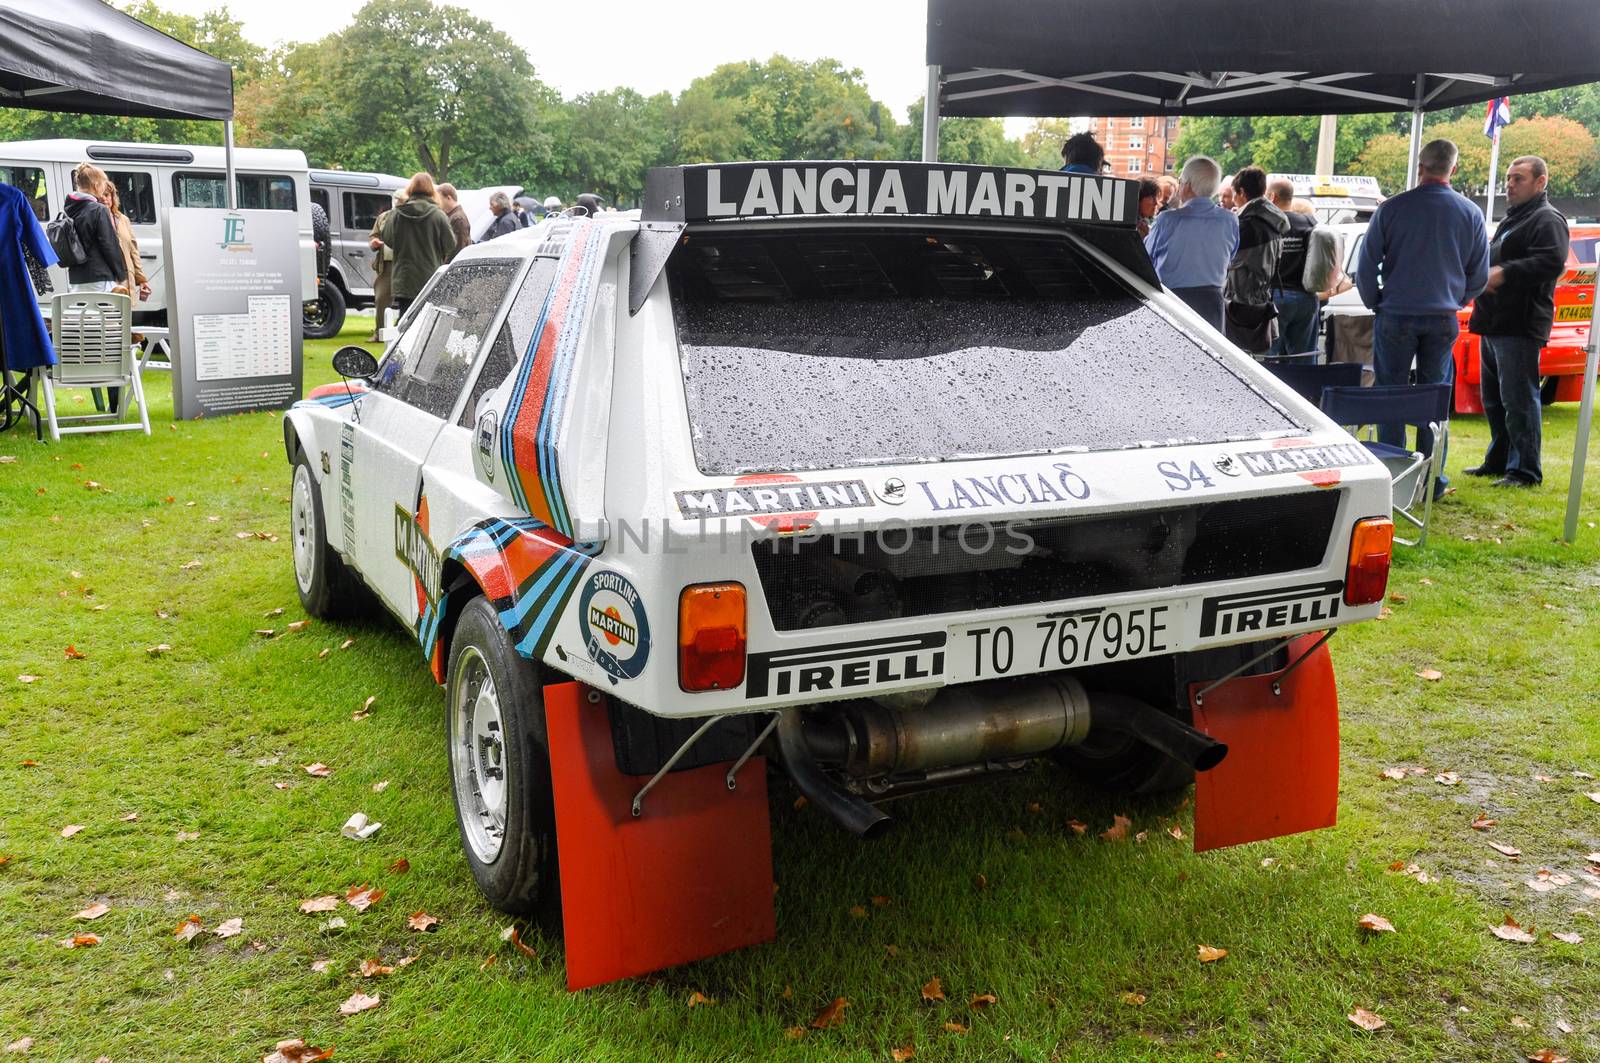 LONDON, UK - CIRCA SEPTEMBER 2011: A Lancia Delta S4 at Chelsea Autolegends. The Lancia Delta S4 was a Group B rally car, here with a Martini livery.